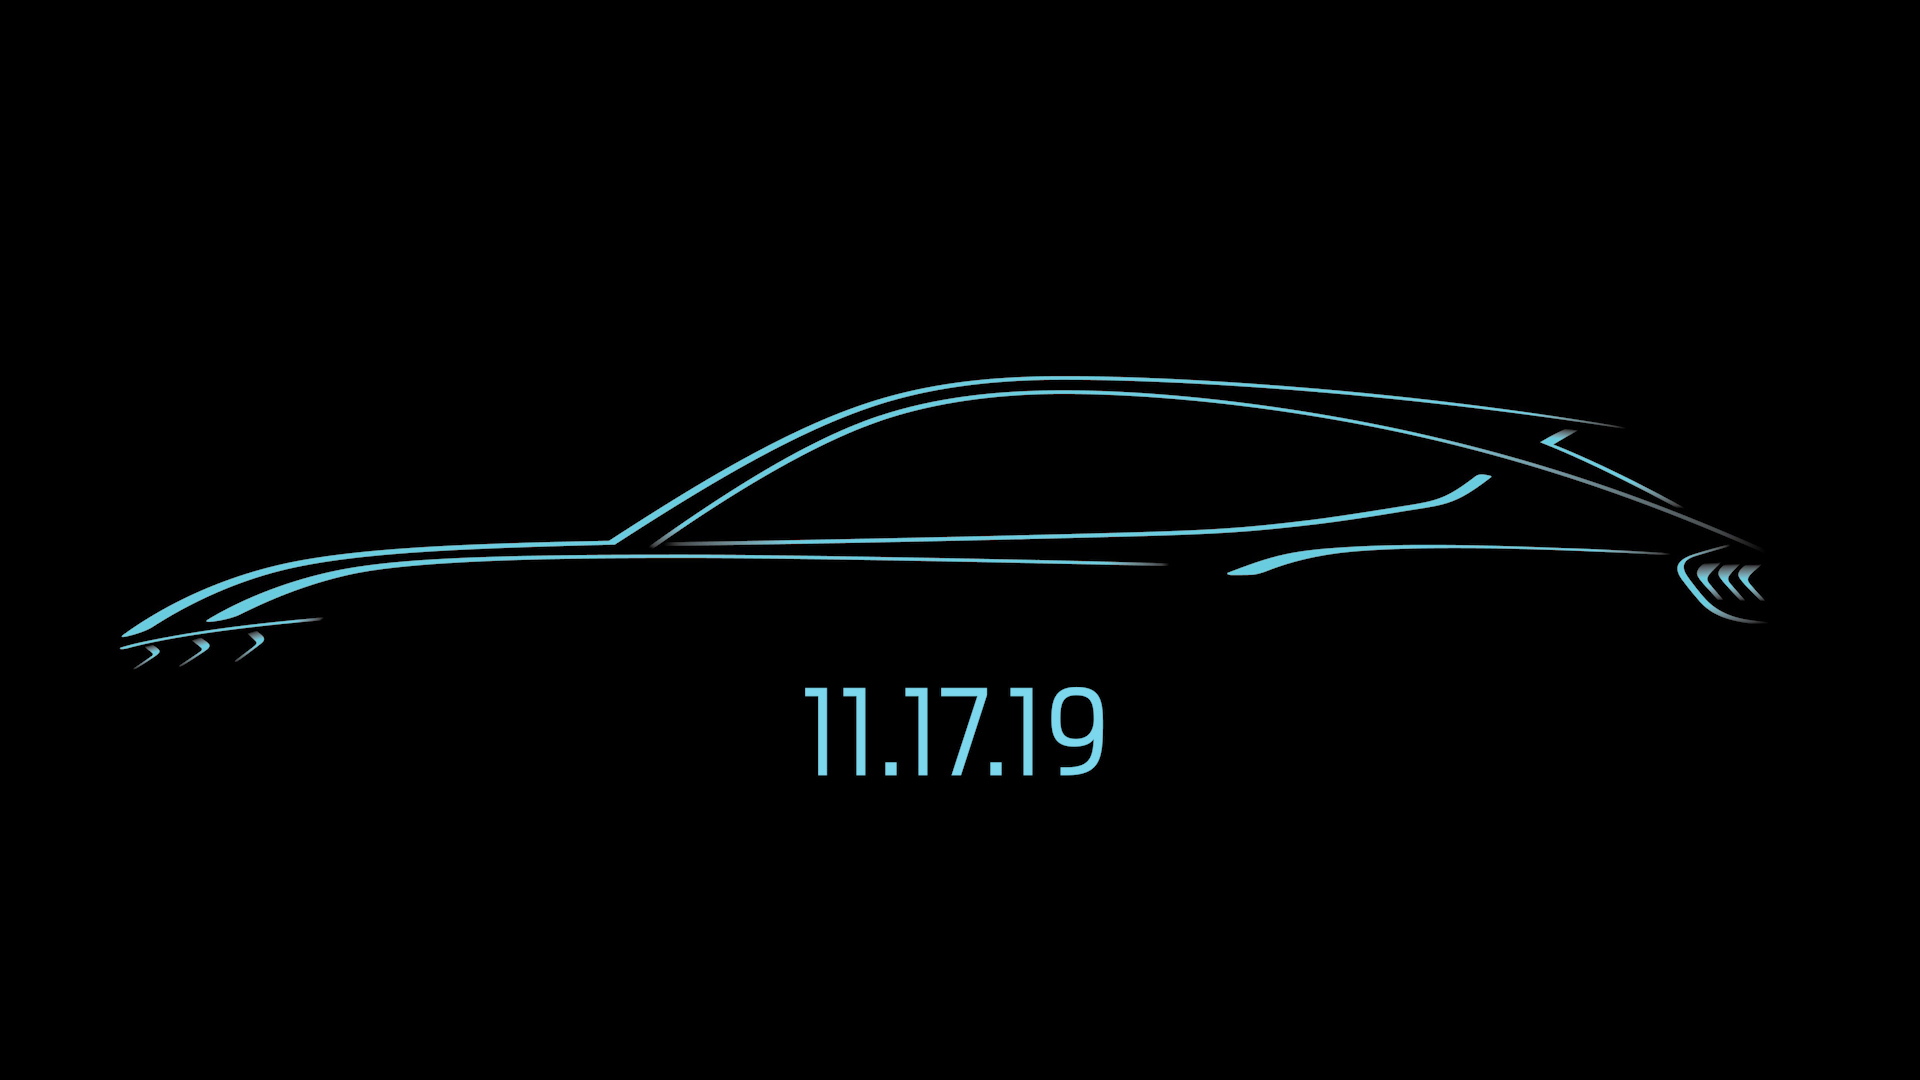 Teaser for Ford Mustang Mach-E debuting at 2019 Los Angeles Auto Show